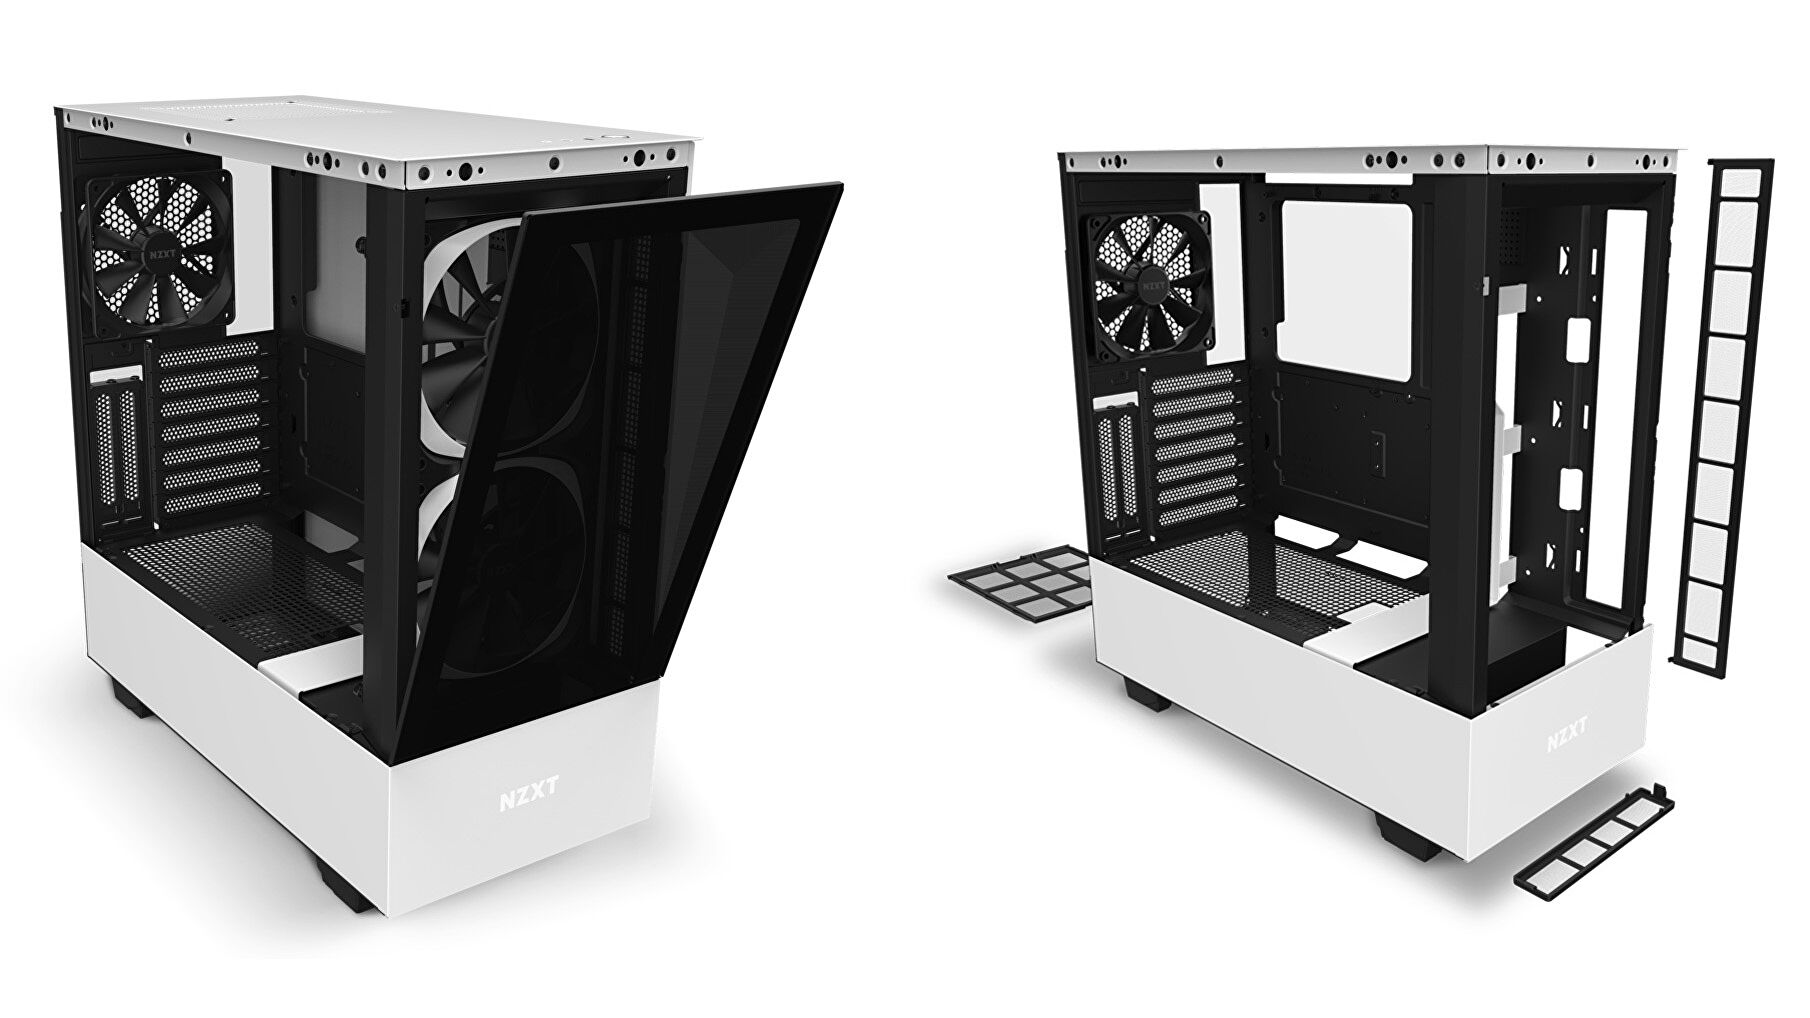 Grab NZXT’s H510 Elite PC case for $80 after a 50% discount